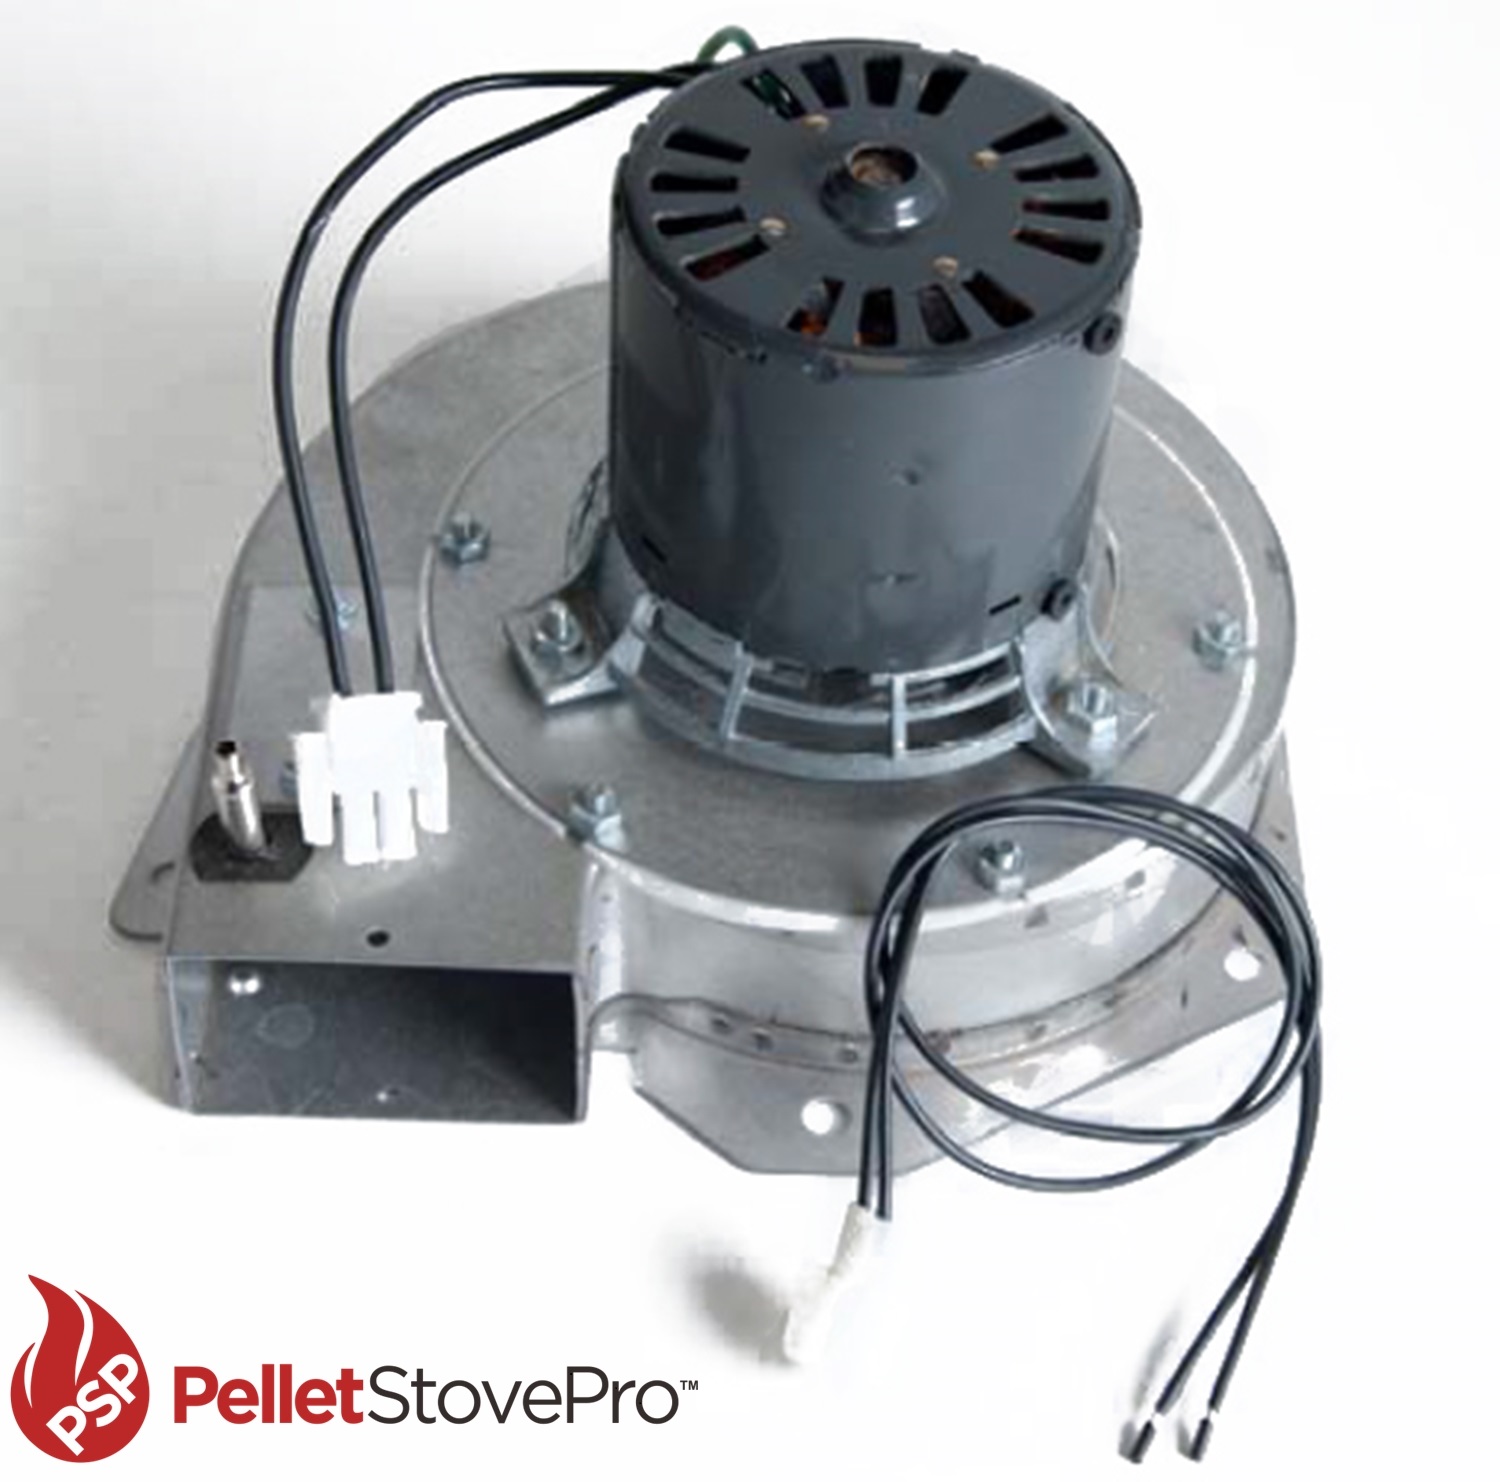 PelletStovePro Breckwell Pellet Stove Room Air Convection Blower Fan Gasket